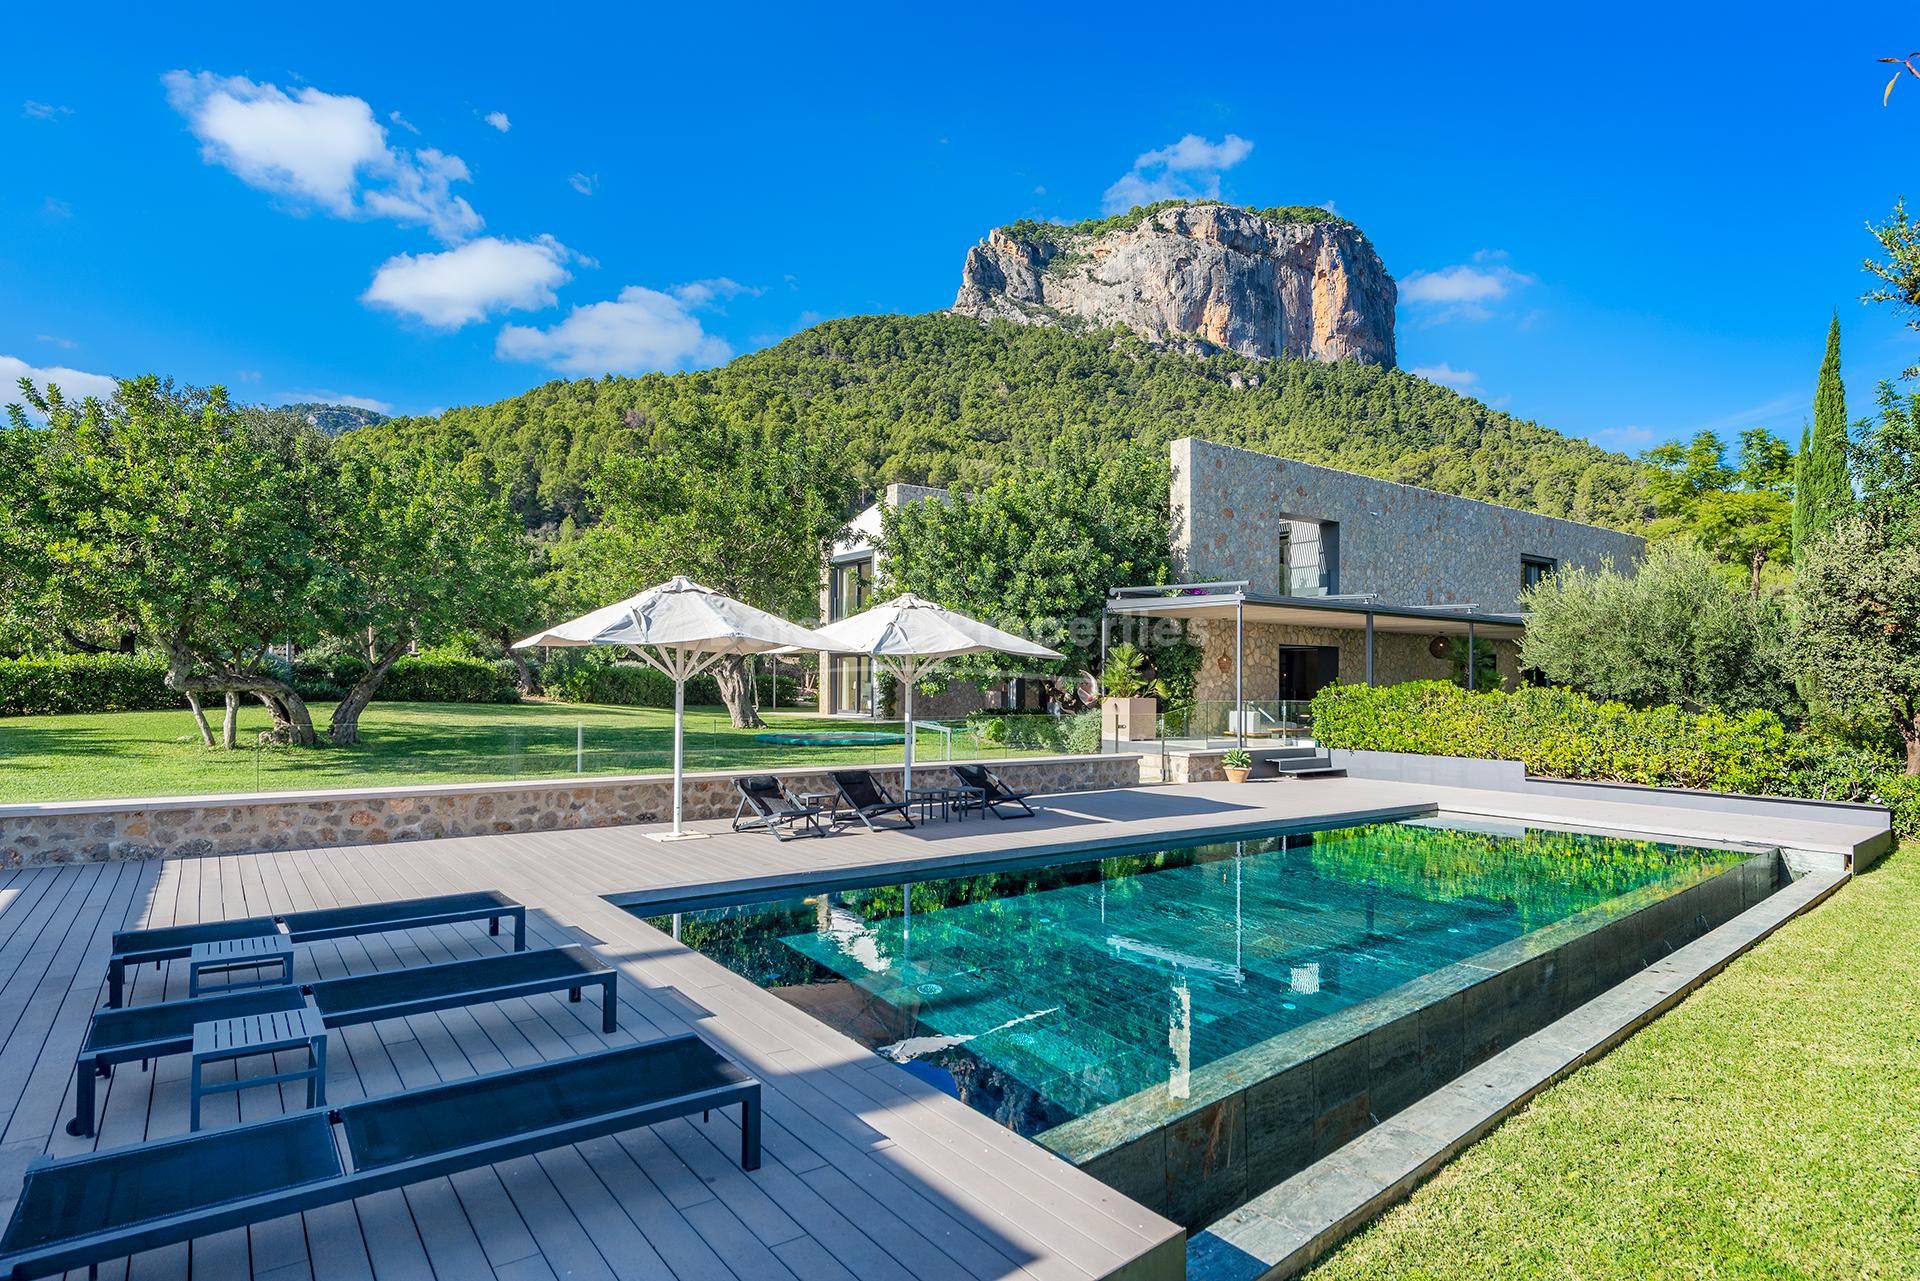 Incredible country house for sale at the foot of the Tramuntana mountains in Alaró, Mallorca